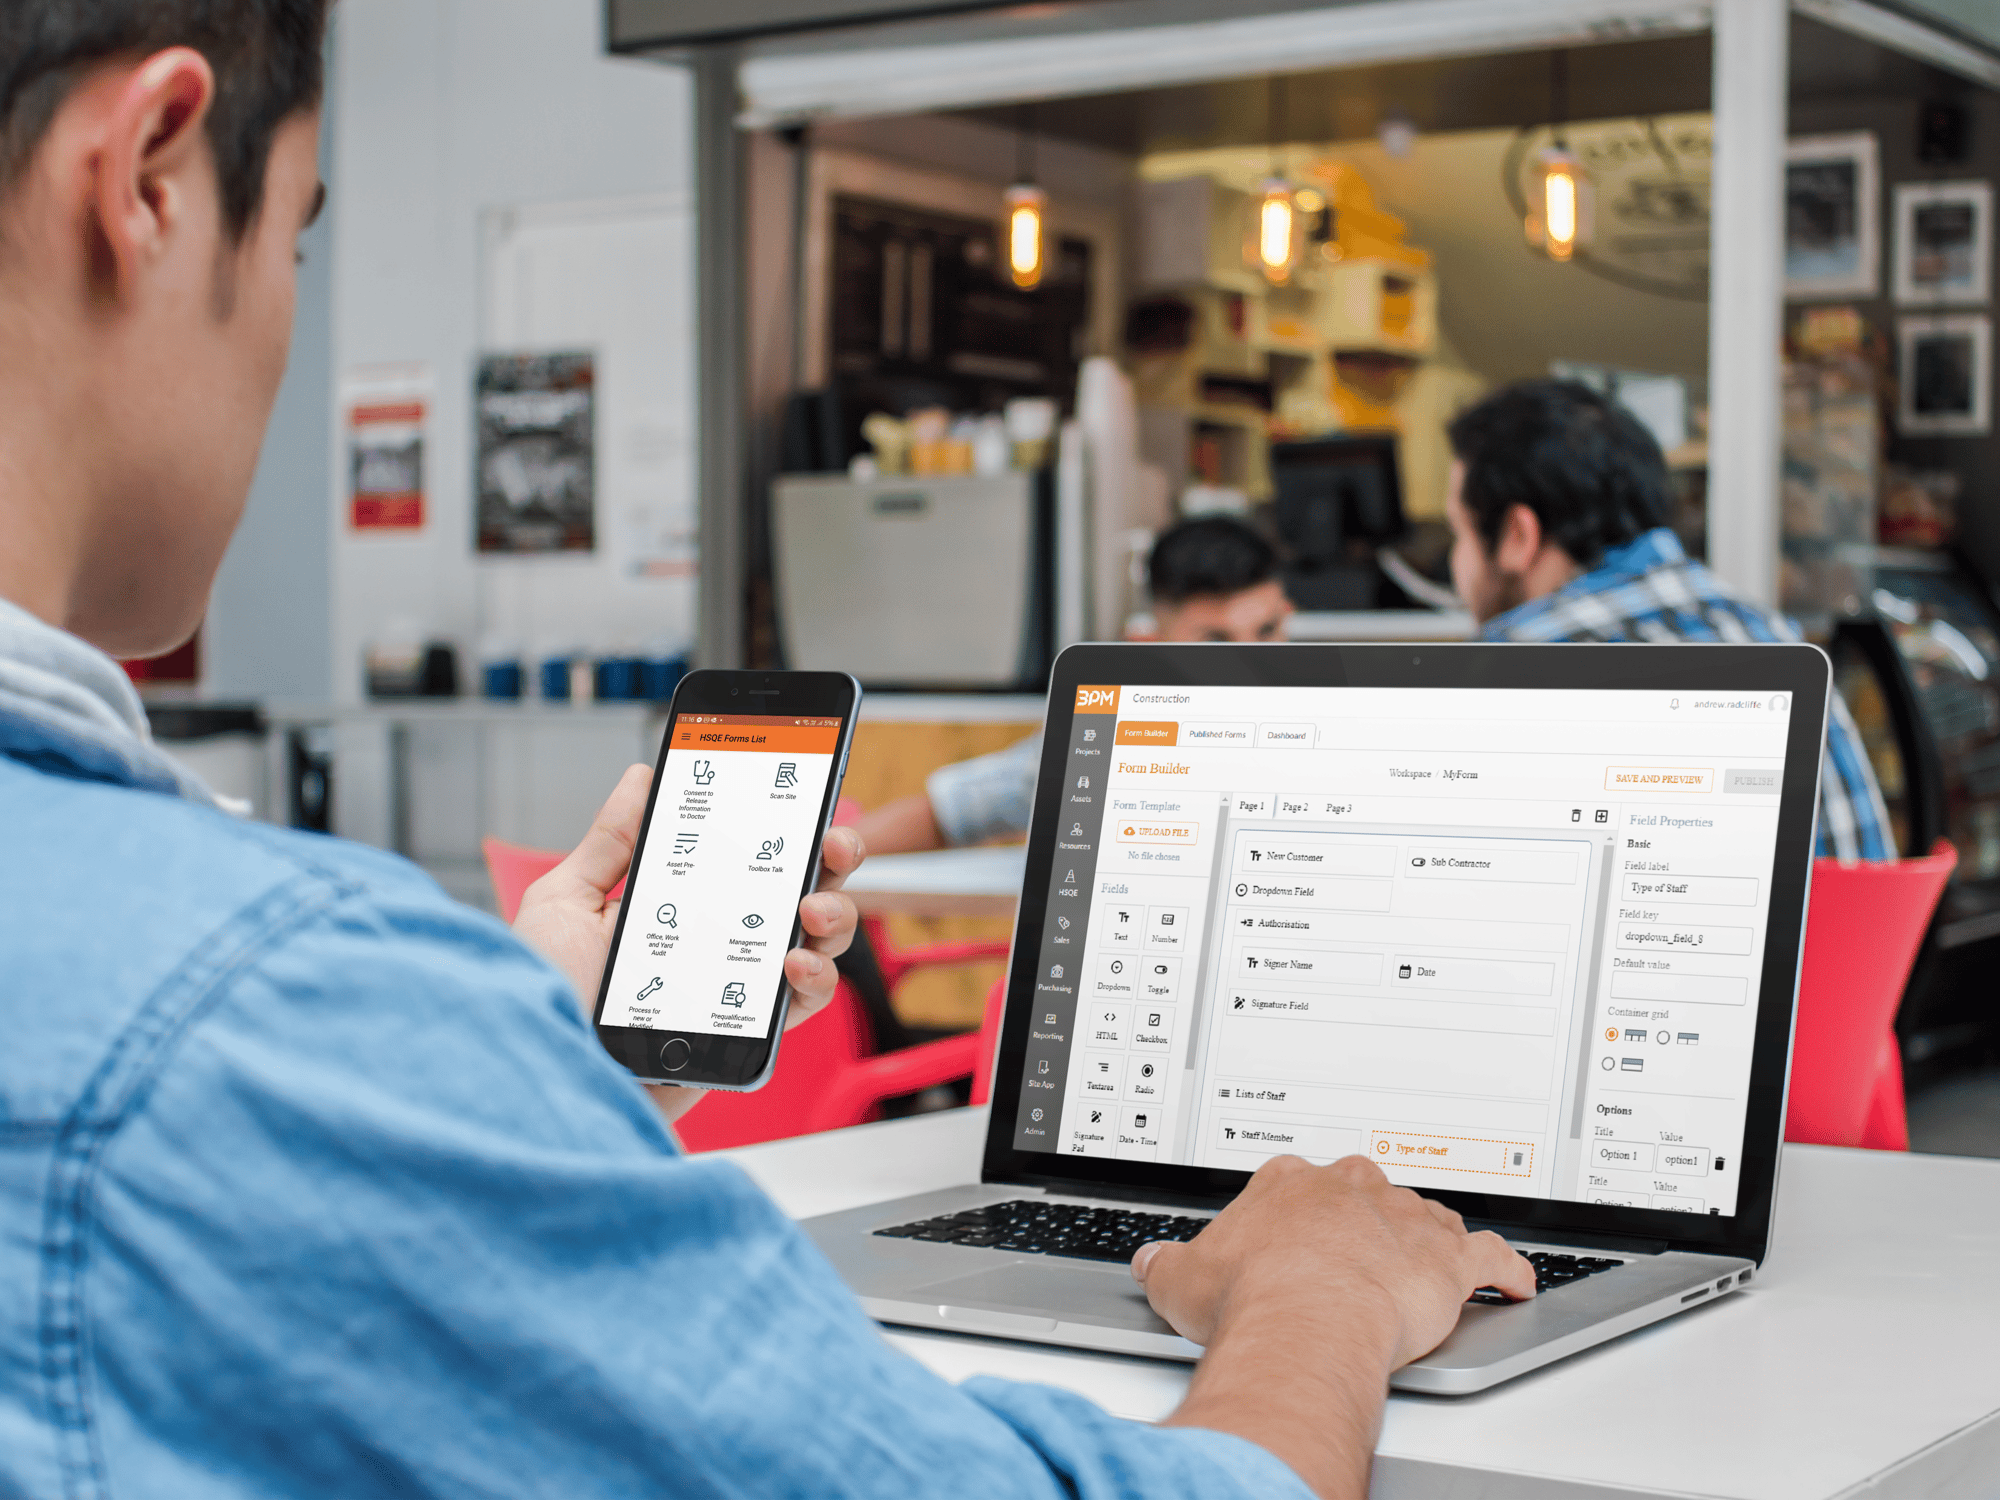 iphone-and-macbook-mockup-of-a-young-man-at-the-cafeteria-a4635